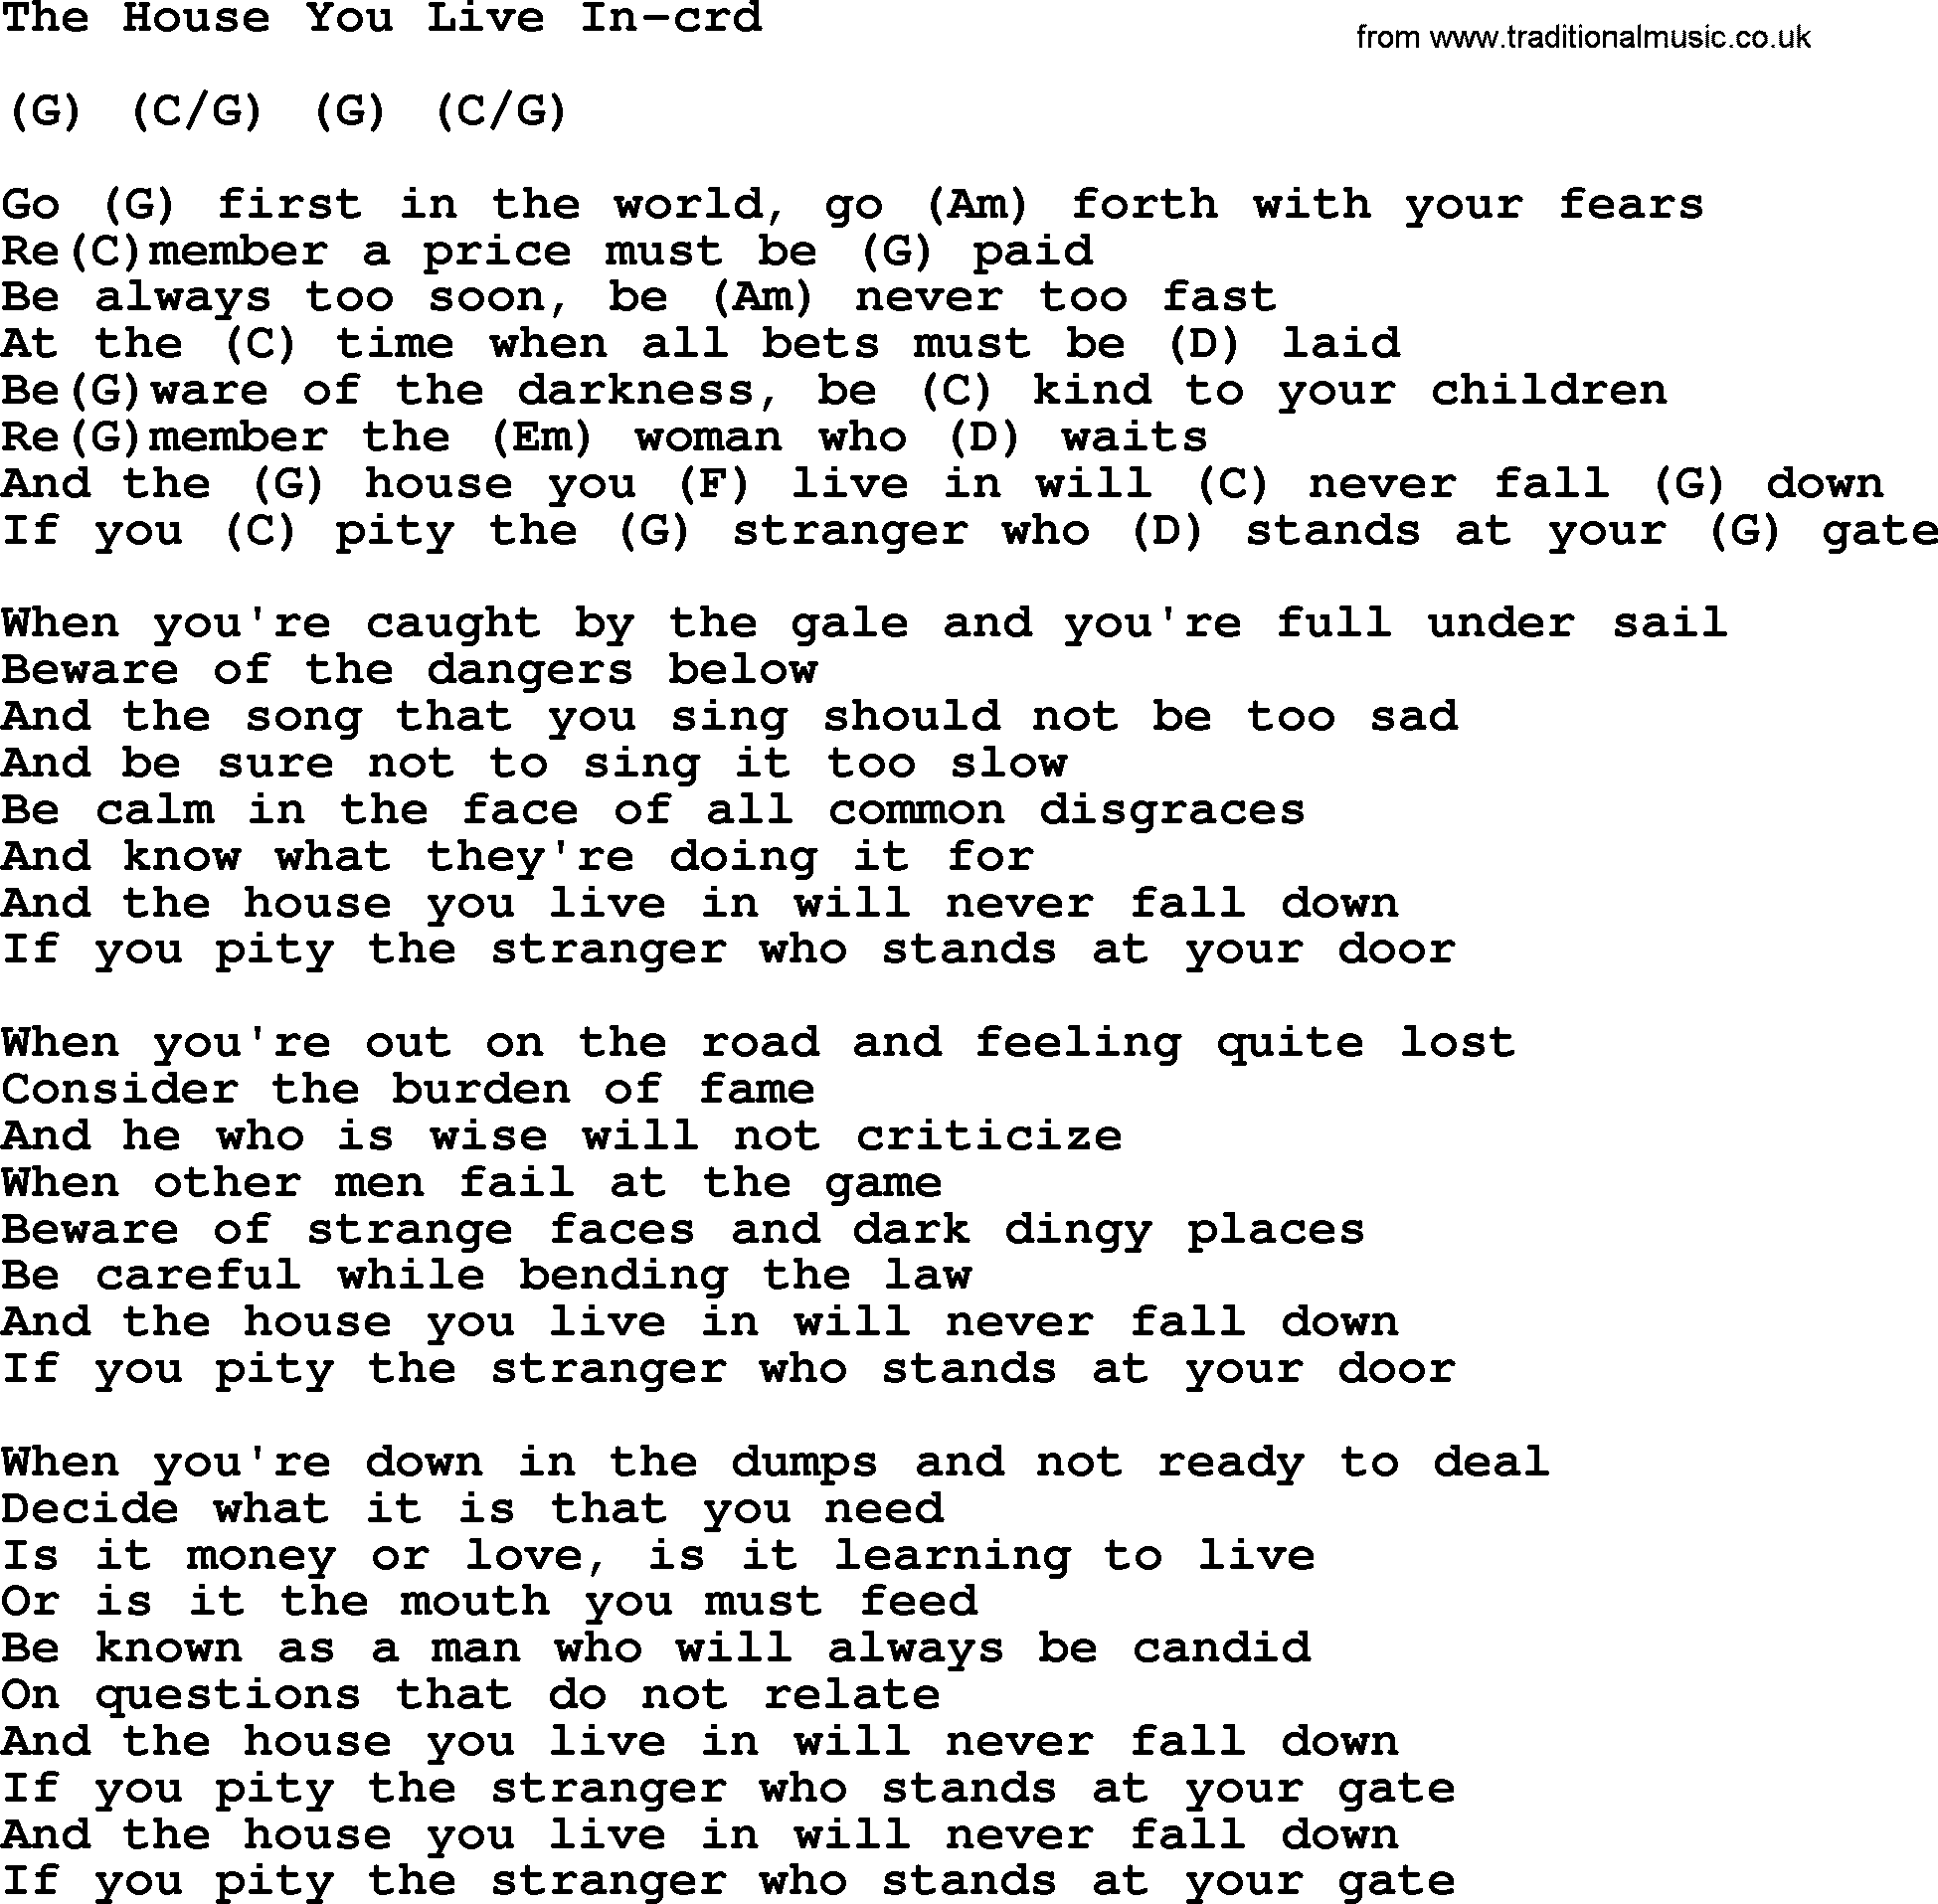 Gordon Lightfoot song The House You Live In, lyrics and chords